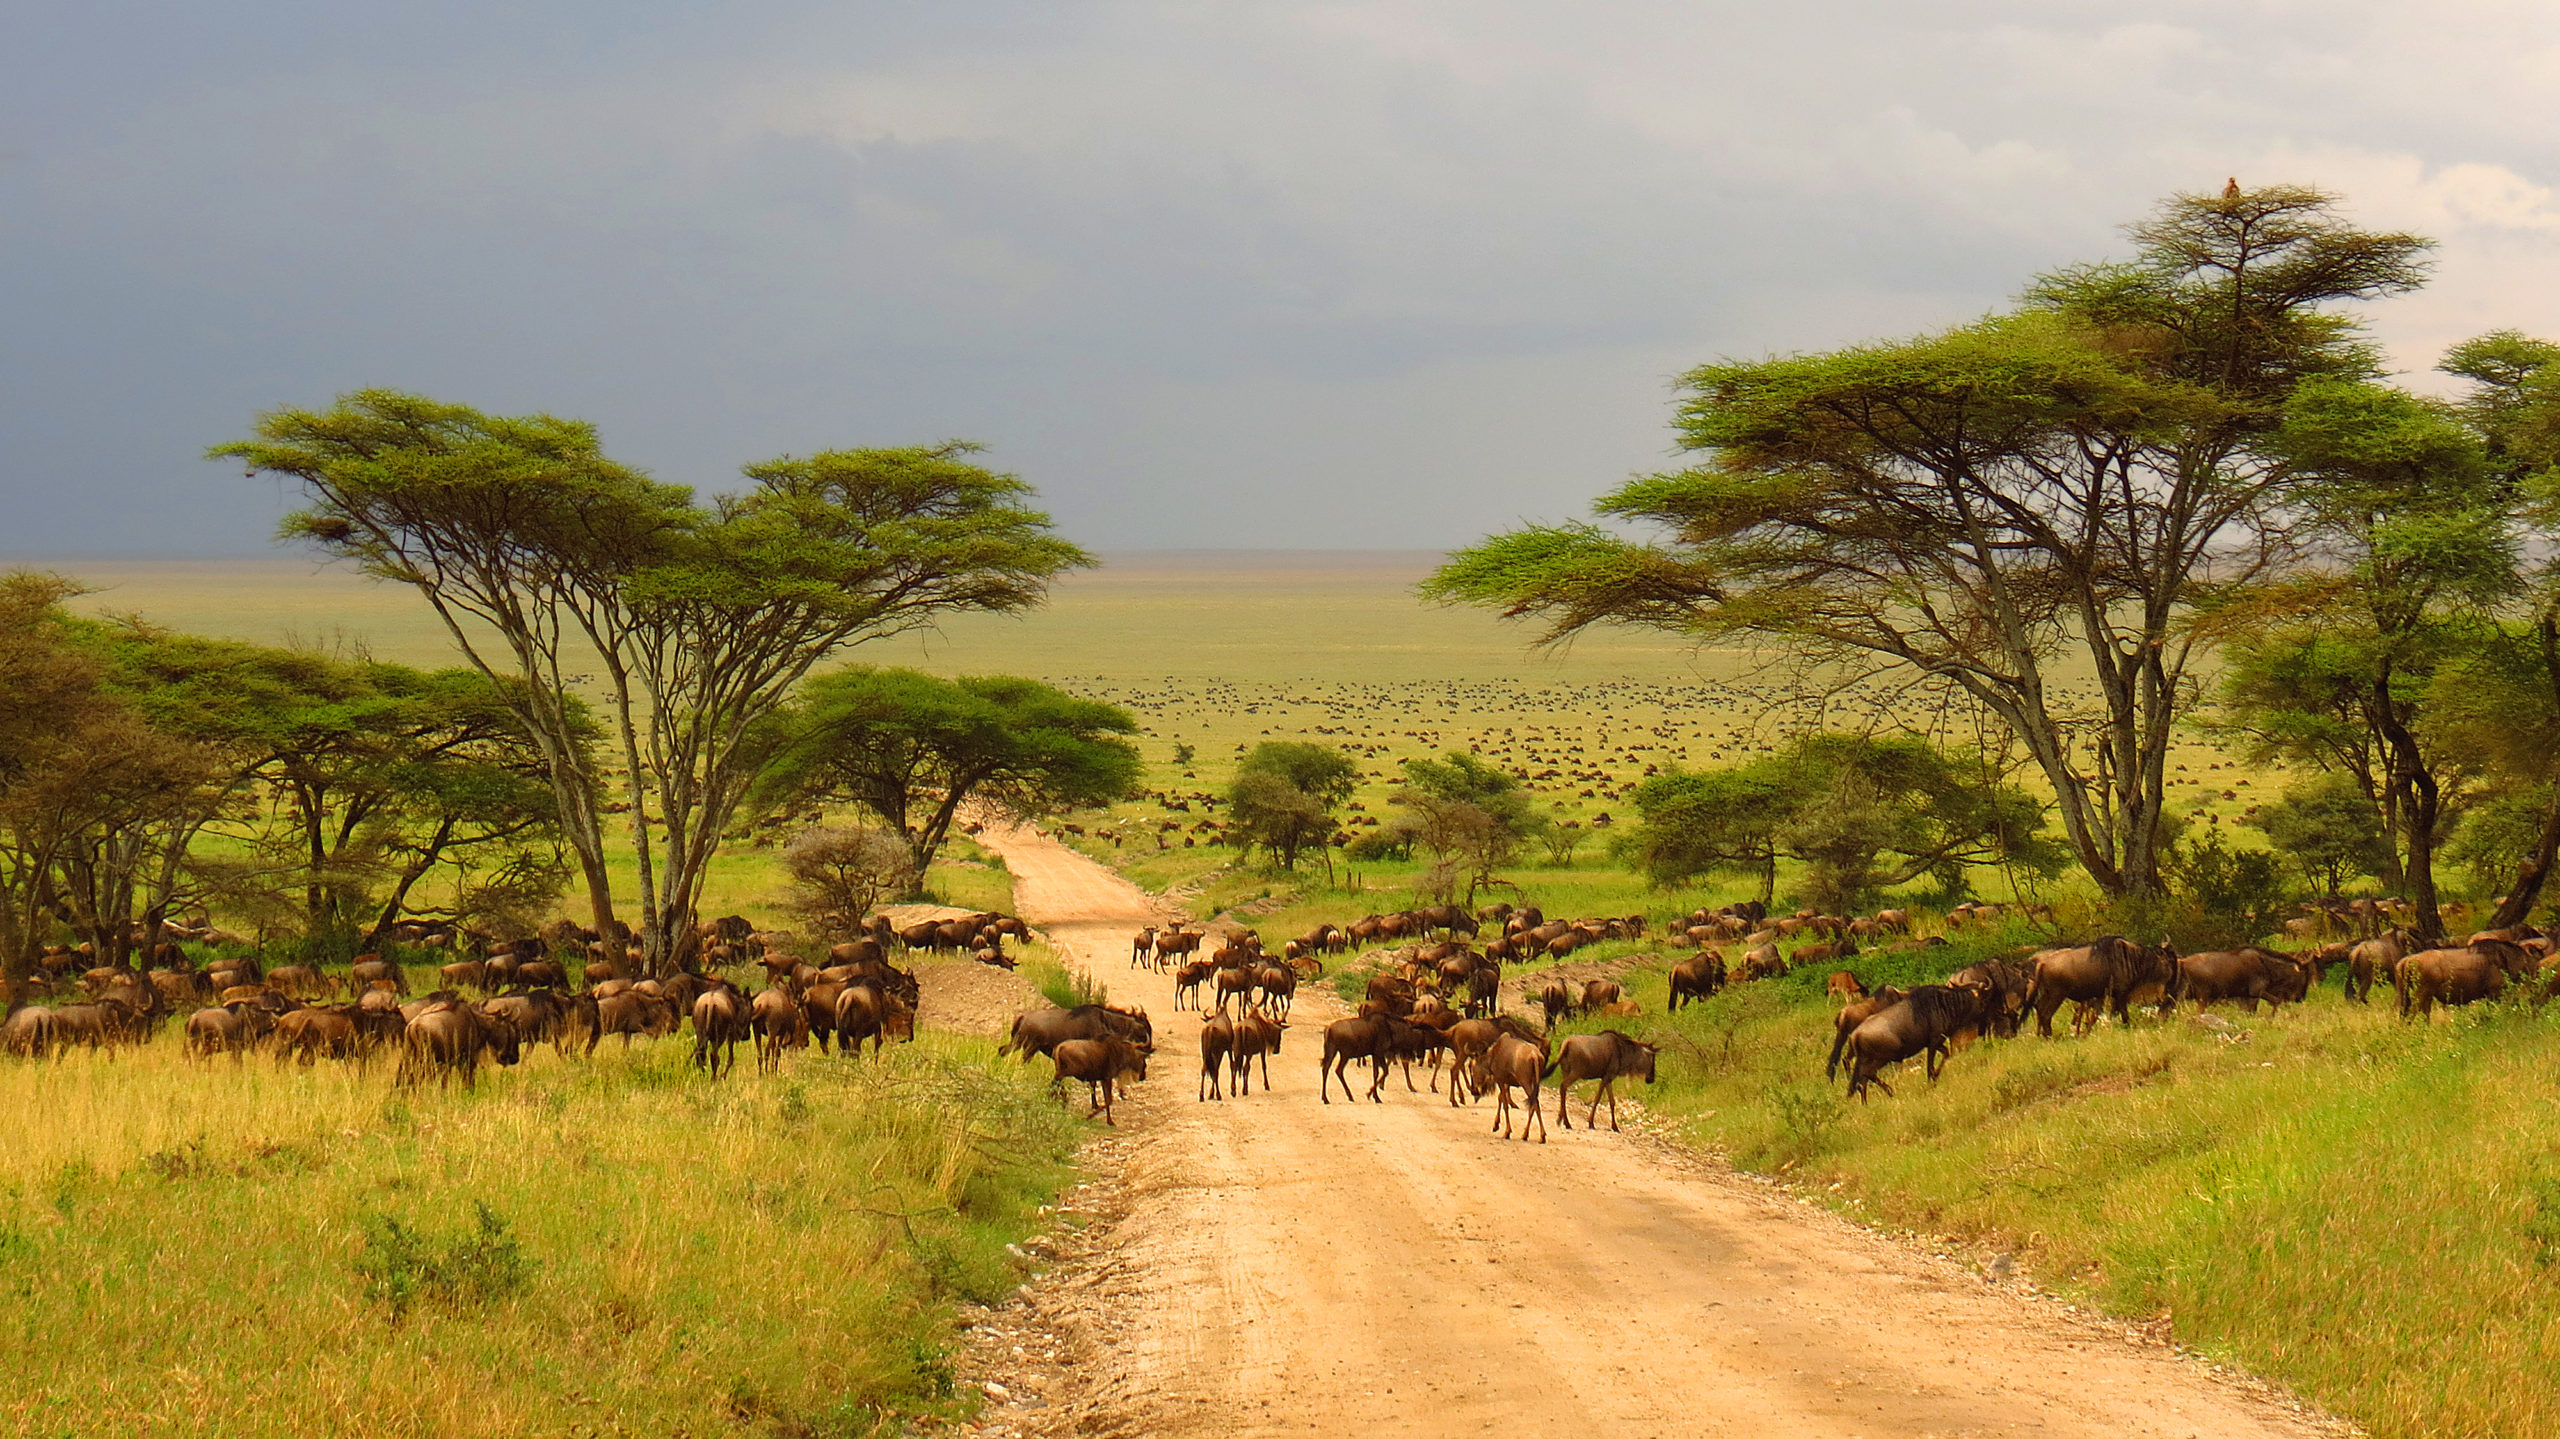 Witness Tanzania’s iconic game like these migrating wildebeest in the Serengeti when you take a tailor-made holiday with Alfred&.